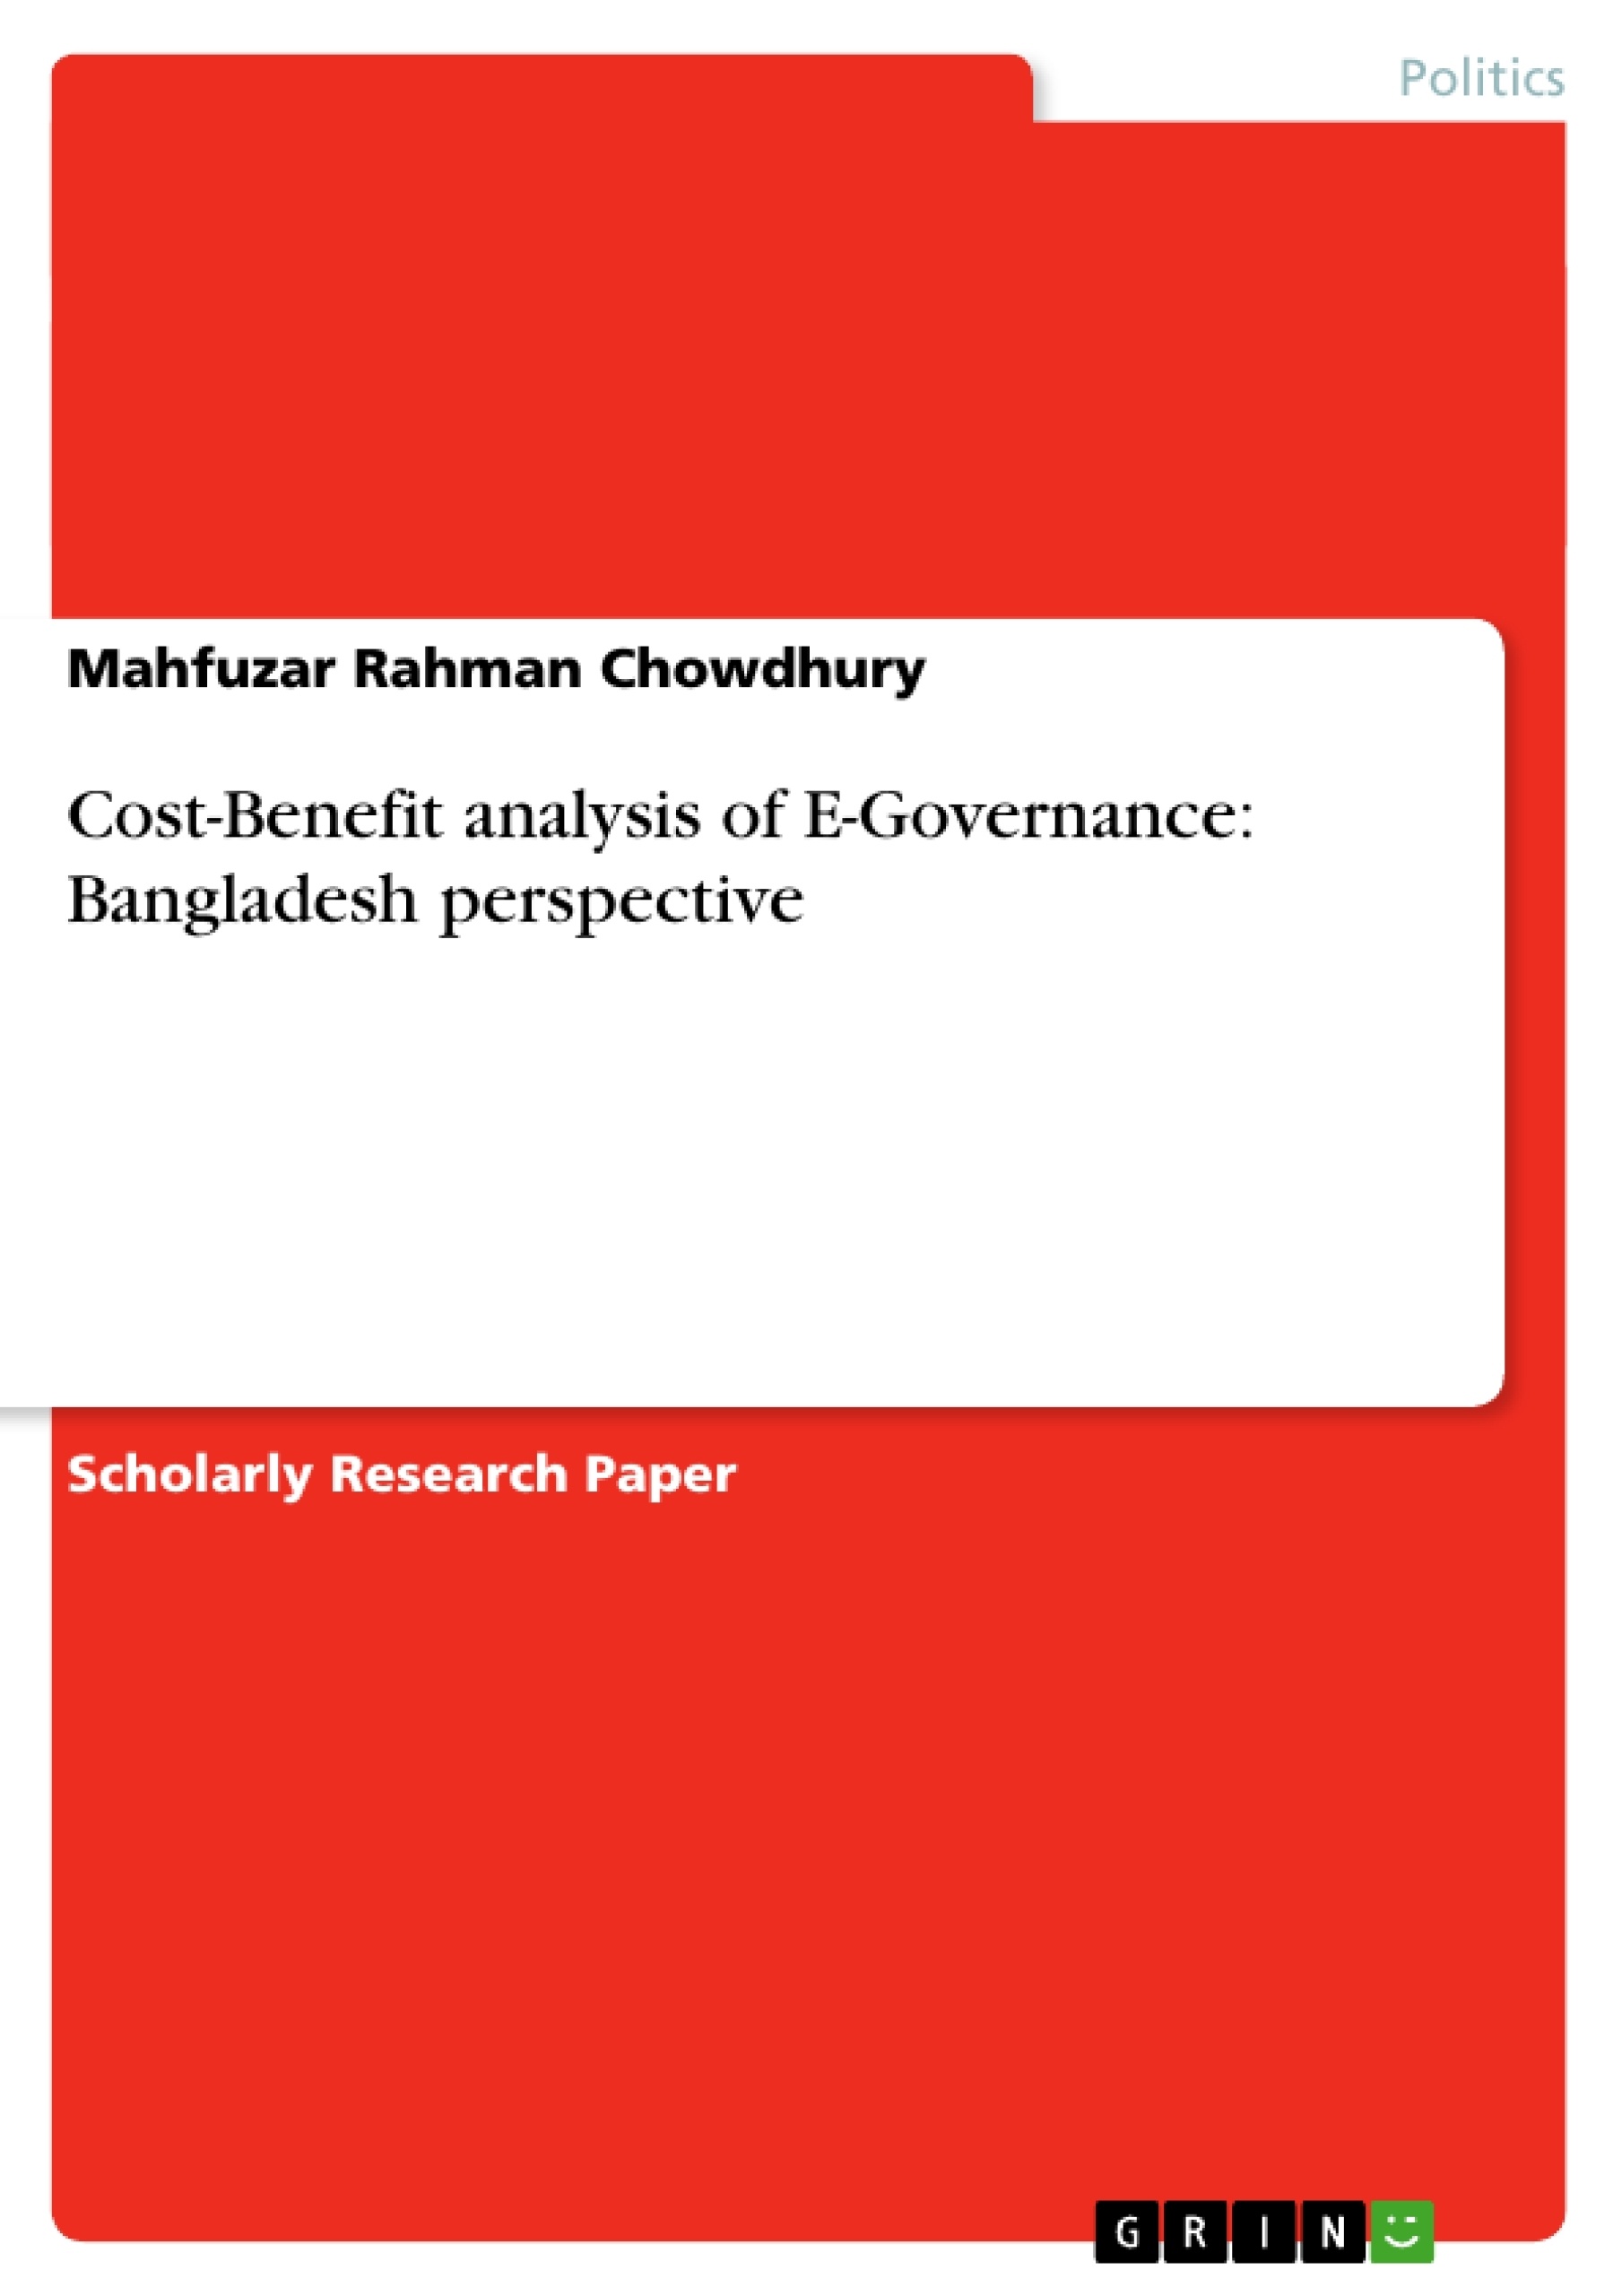 Title: Cost-Benefit analysis of E-Governance: Bangladesh perspective